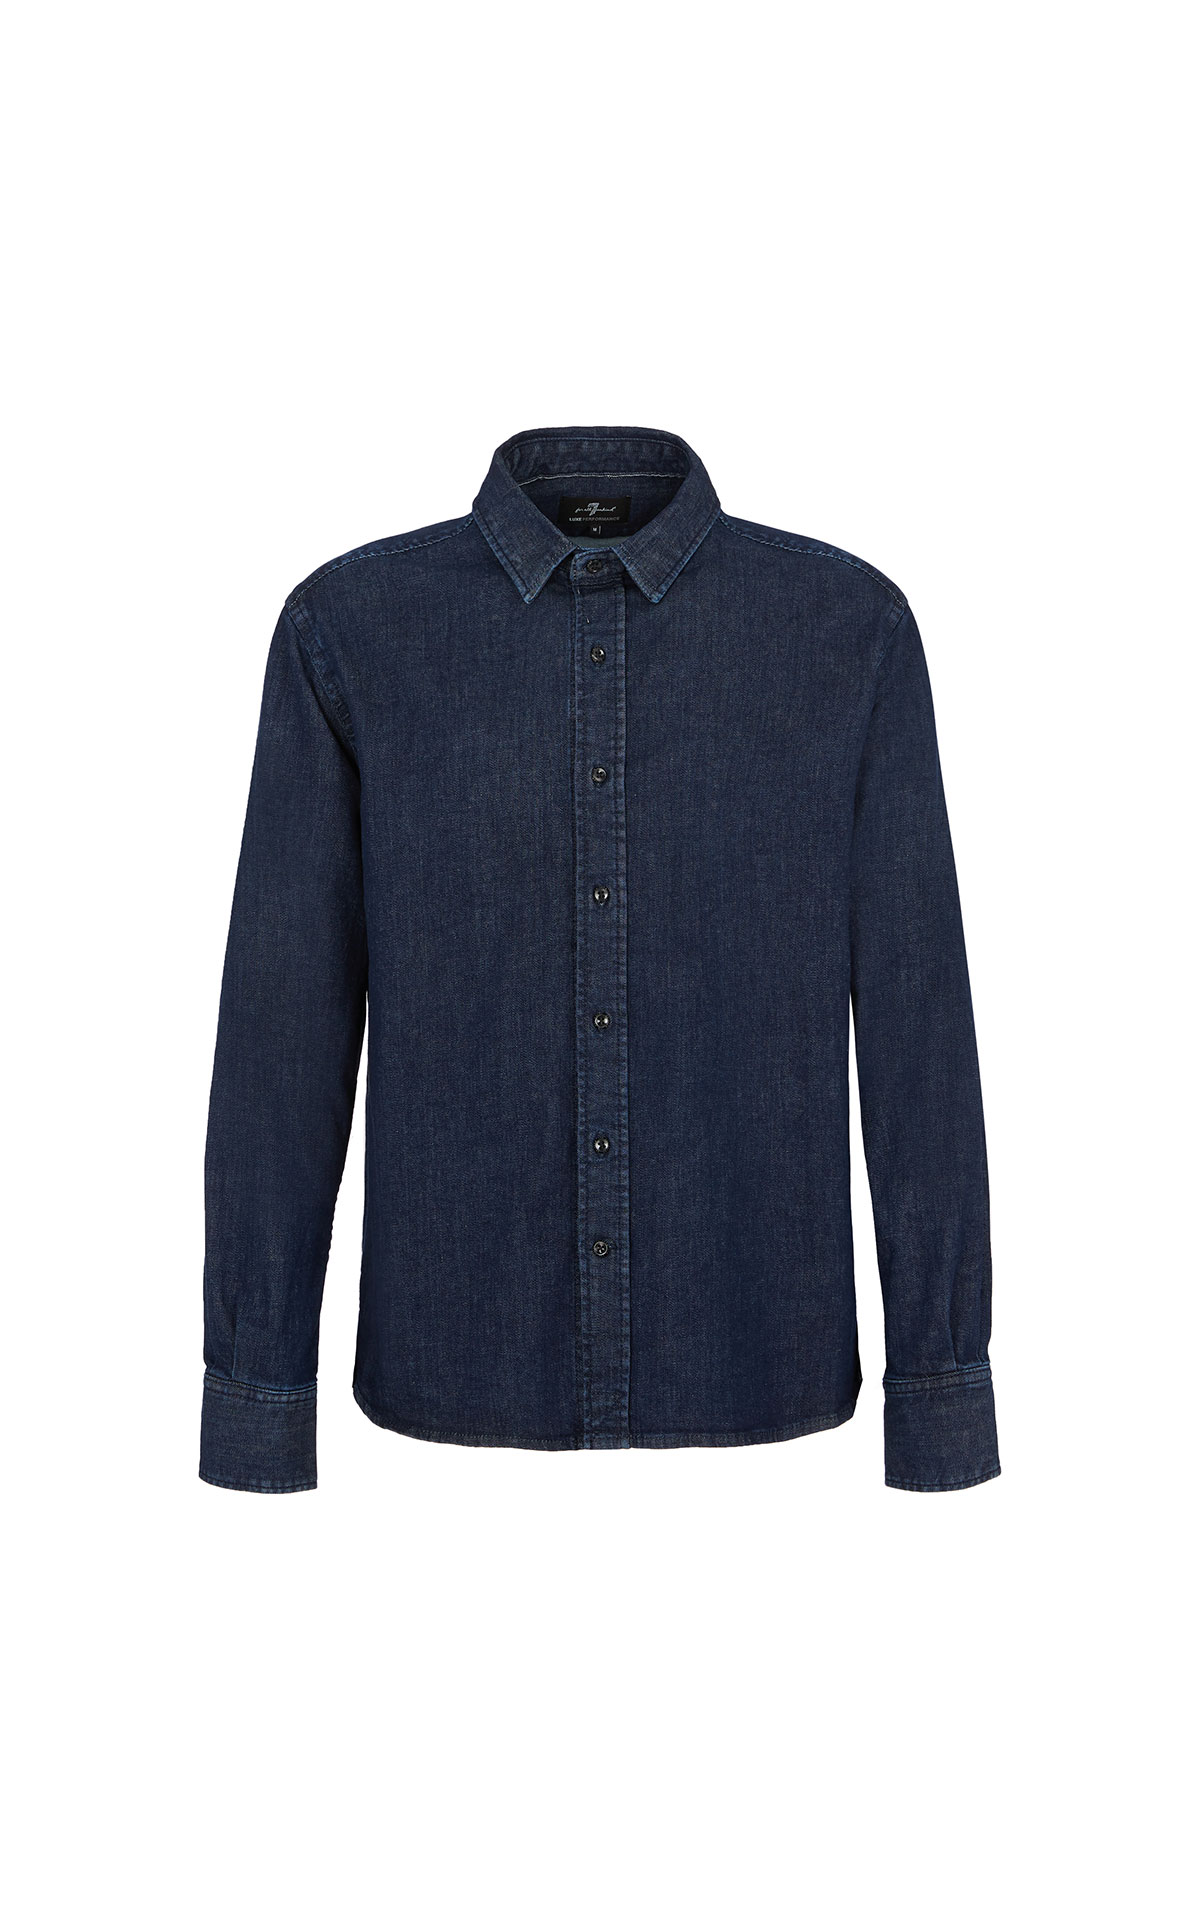 7 For all Mankind Plain shirt from Bicester Village